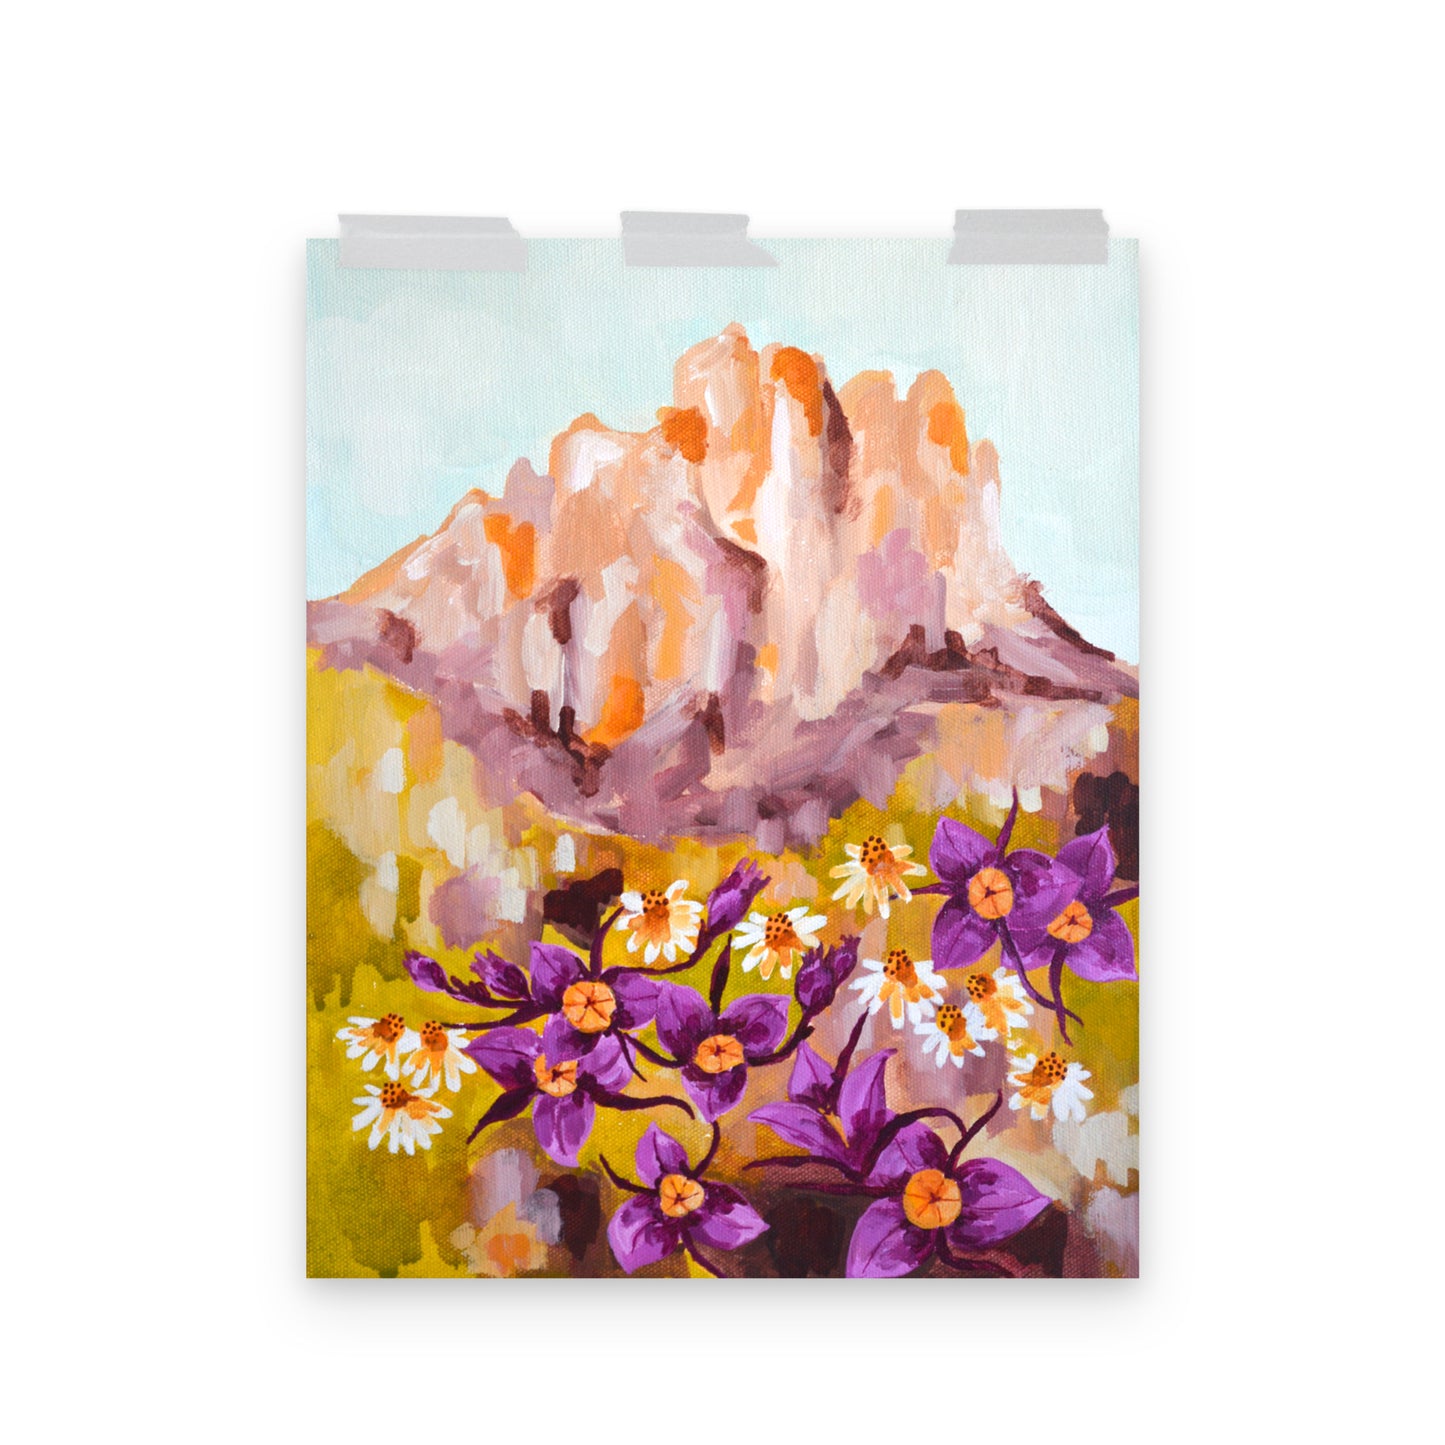 Oregon Smith Rock and Mariposa Lily Wildflowers